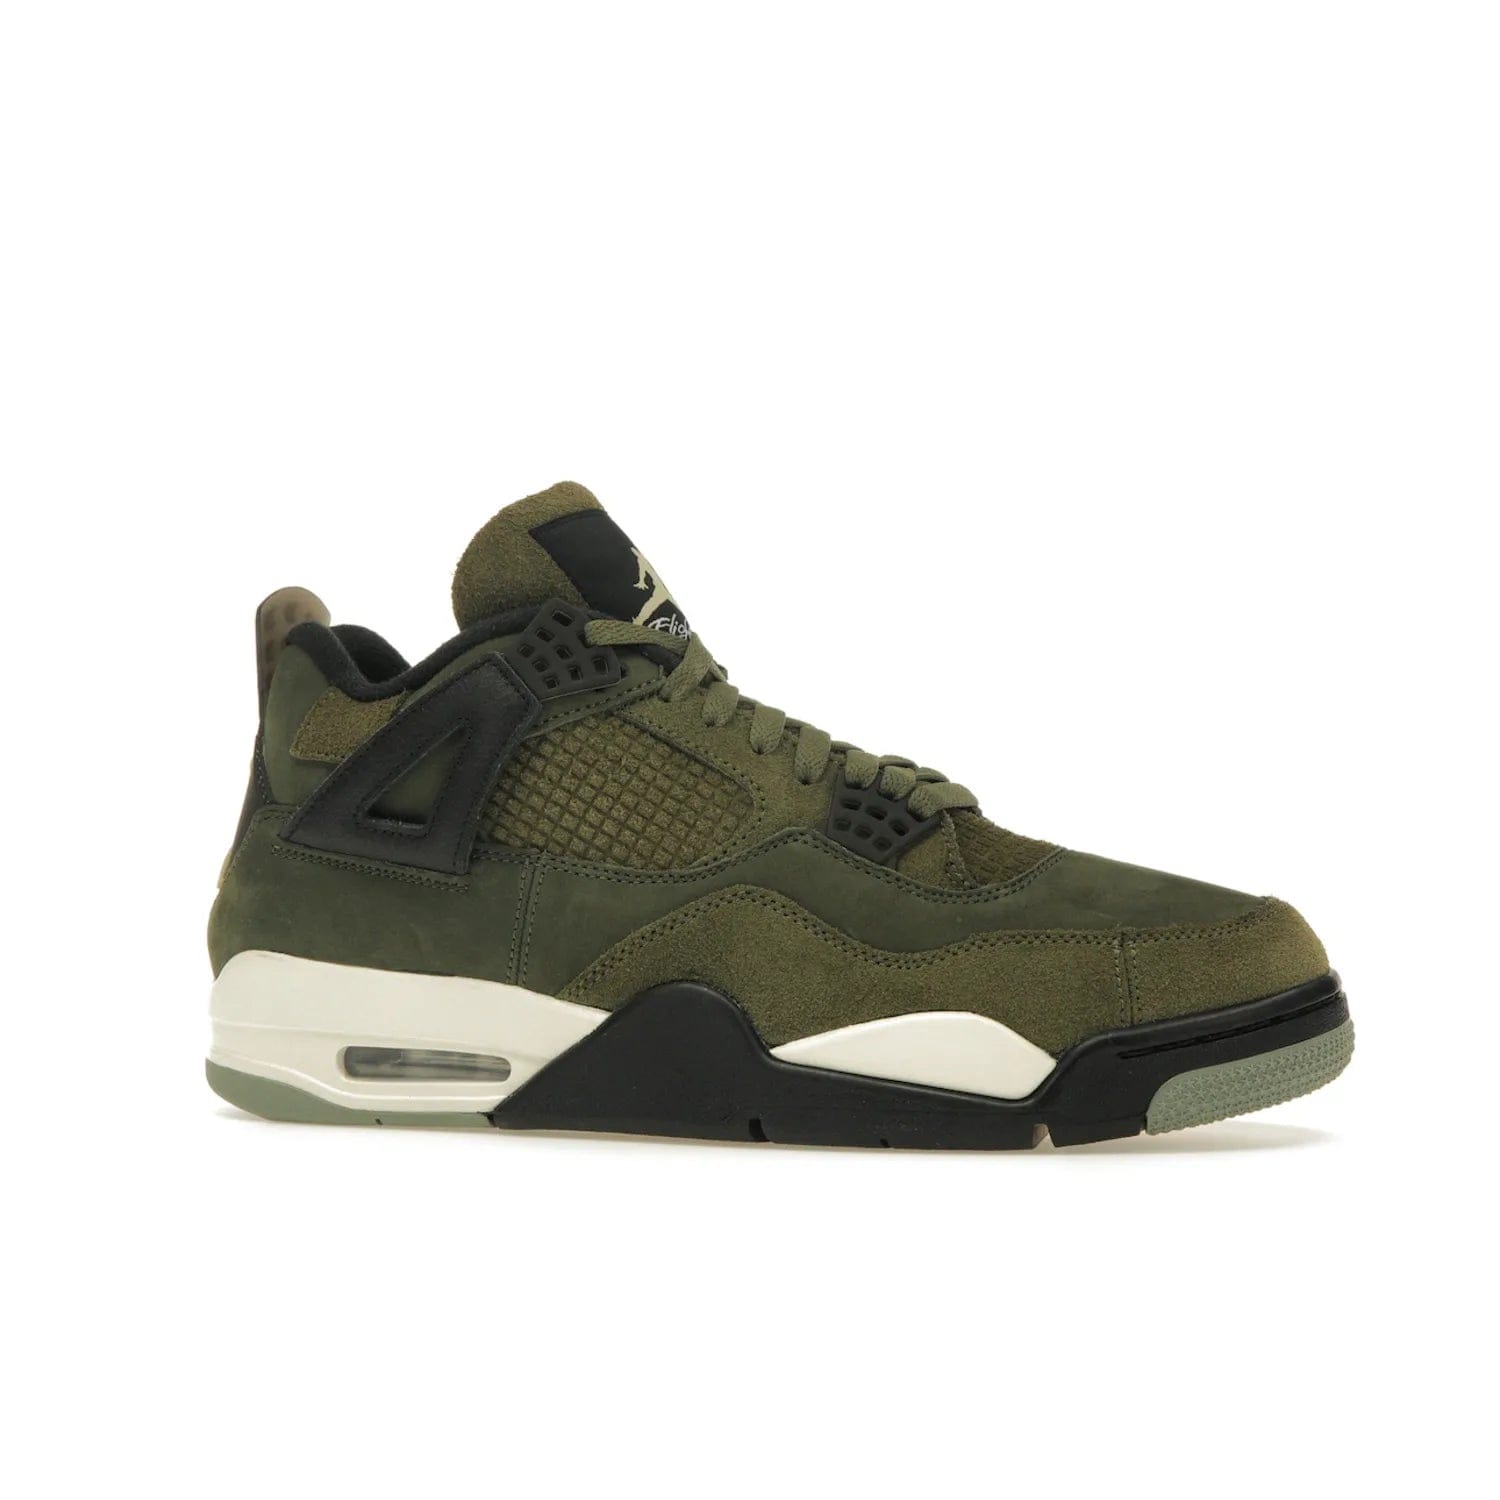 Jordan 4 Retro SE Craft Medium Olive - Image 3 - Only at www.BallersClubKickz.com - Grab the Jordan 4 Retro SE Crafts for a unique style. Combines Medium Olive, Pale Vanilla, Khaki, Black and Sail, with same classic shape, cushioning, and rubber outsole. Available on November 18th!